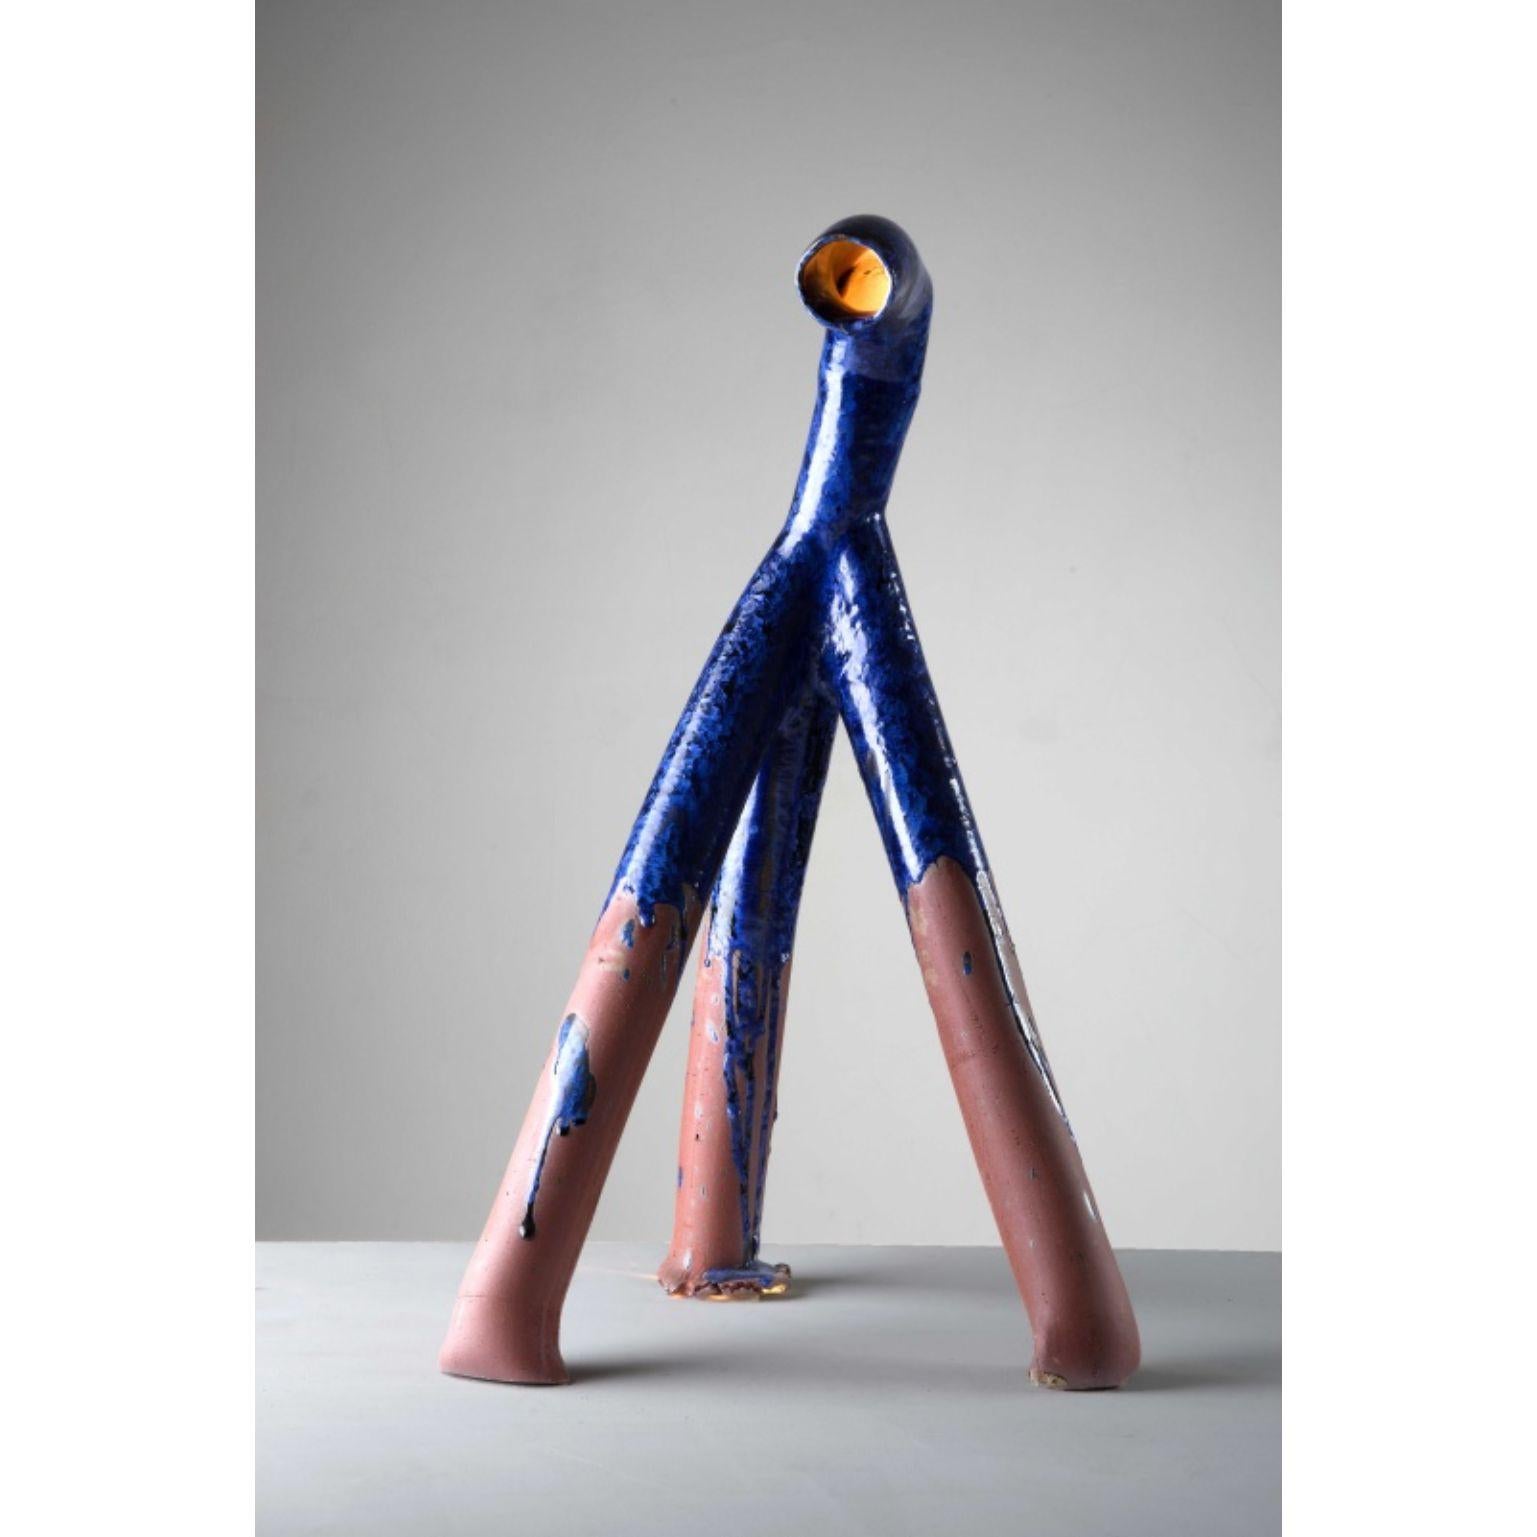 Big blue lamp by Milan Pekar
Dimensions: d x h 80 cm
Materials: Glaze, Clay

handmade in the Czech Republic

All our lamps can be wired according to each country. If sold to the USA it will be wired for the USA for instance.

Established own